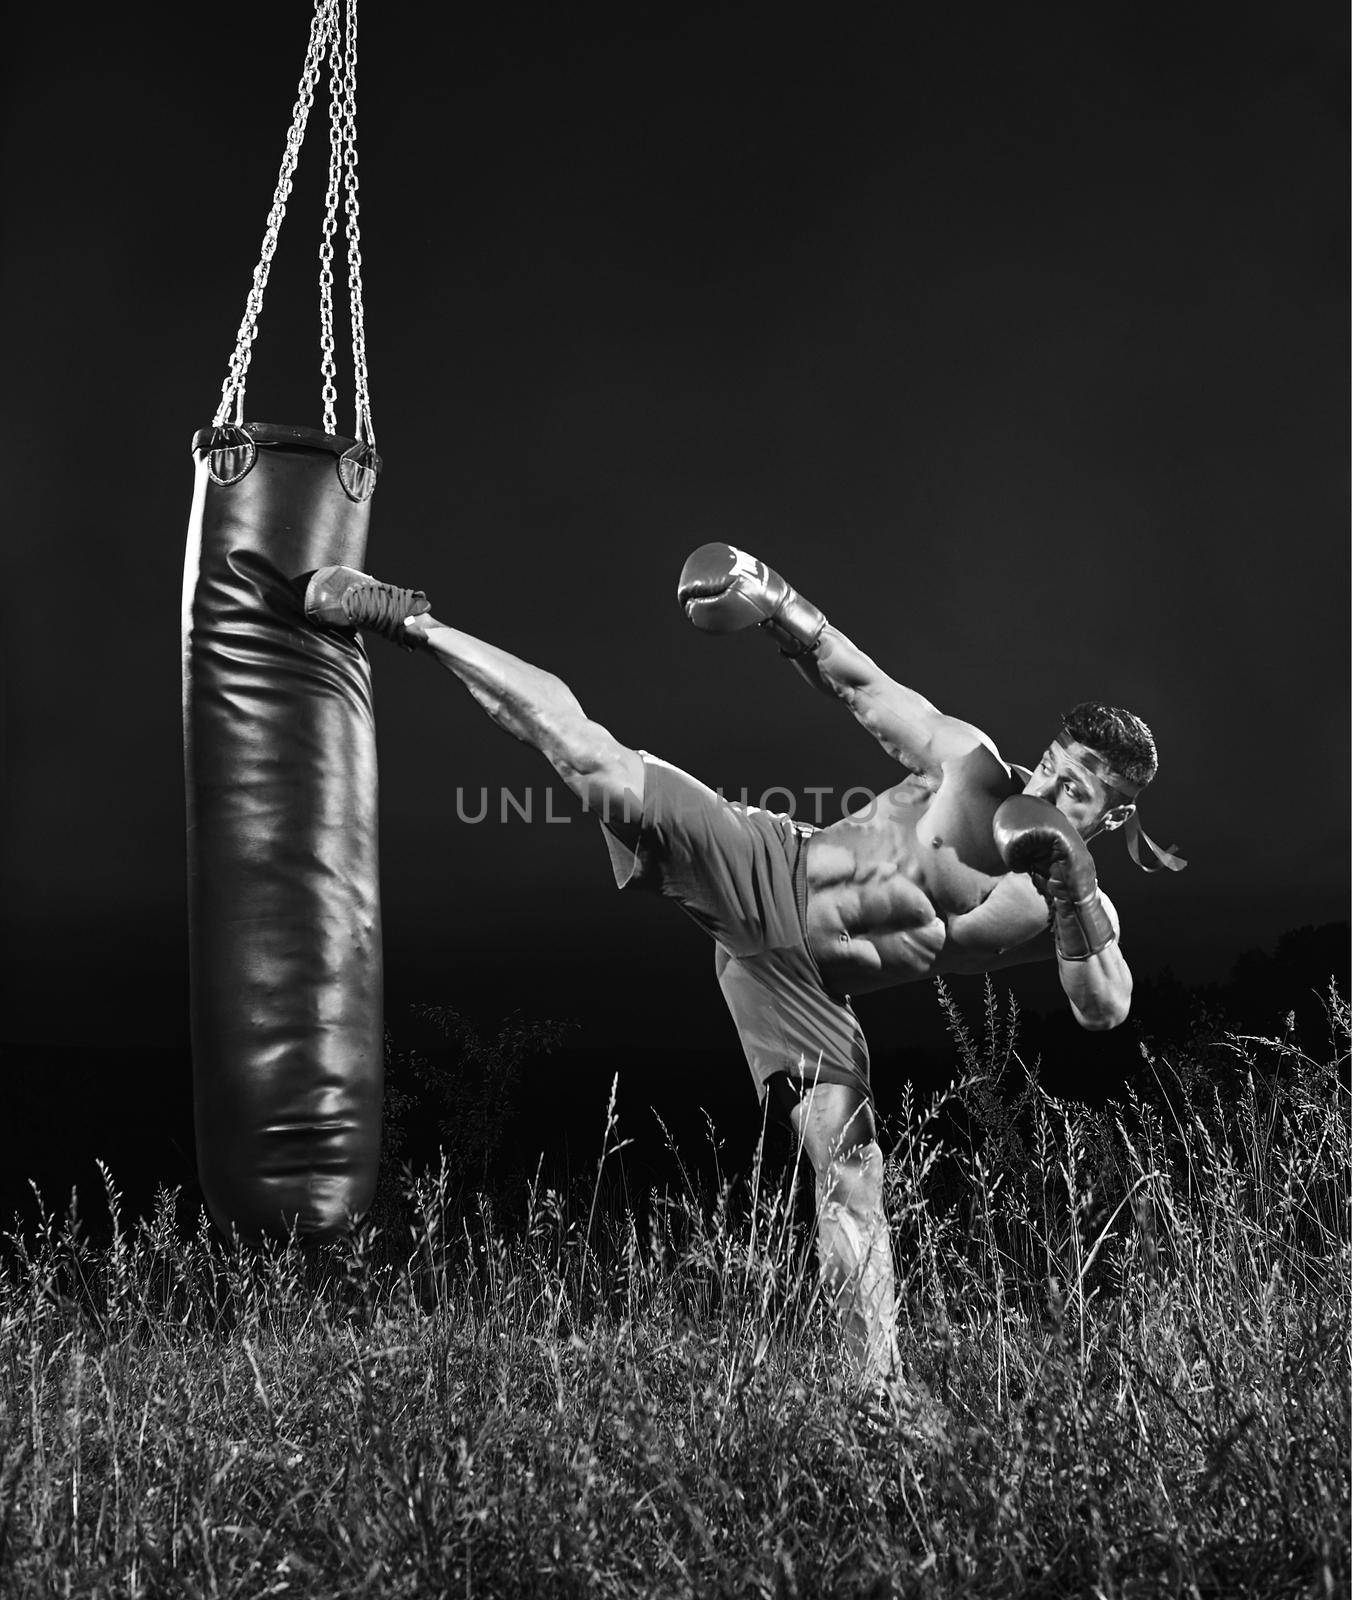 Full length monochrome shot of a muscular young kick boxer kicking a heavy bag training outdoors nature workout exercising combat martial fitness sport sportive sportsman athletics physique.